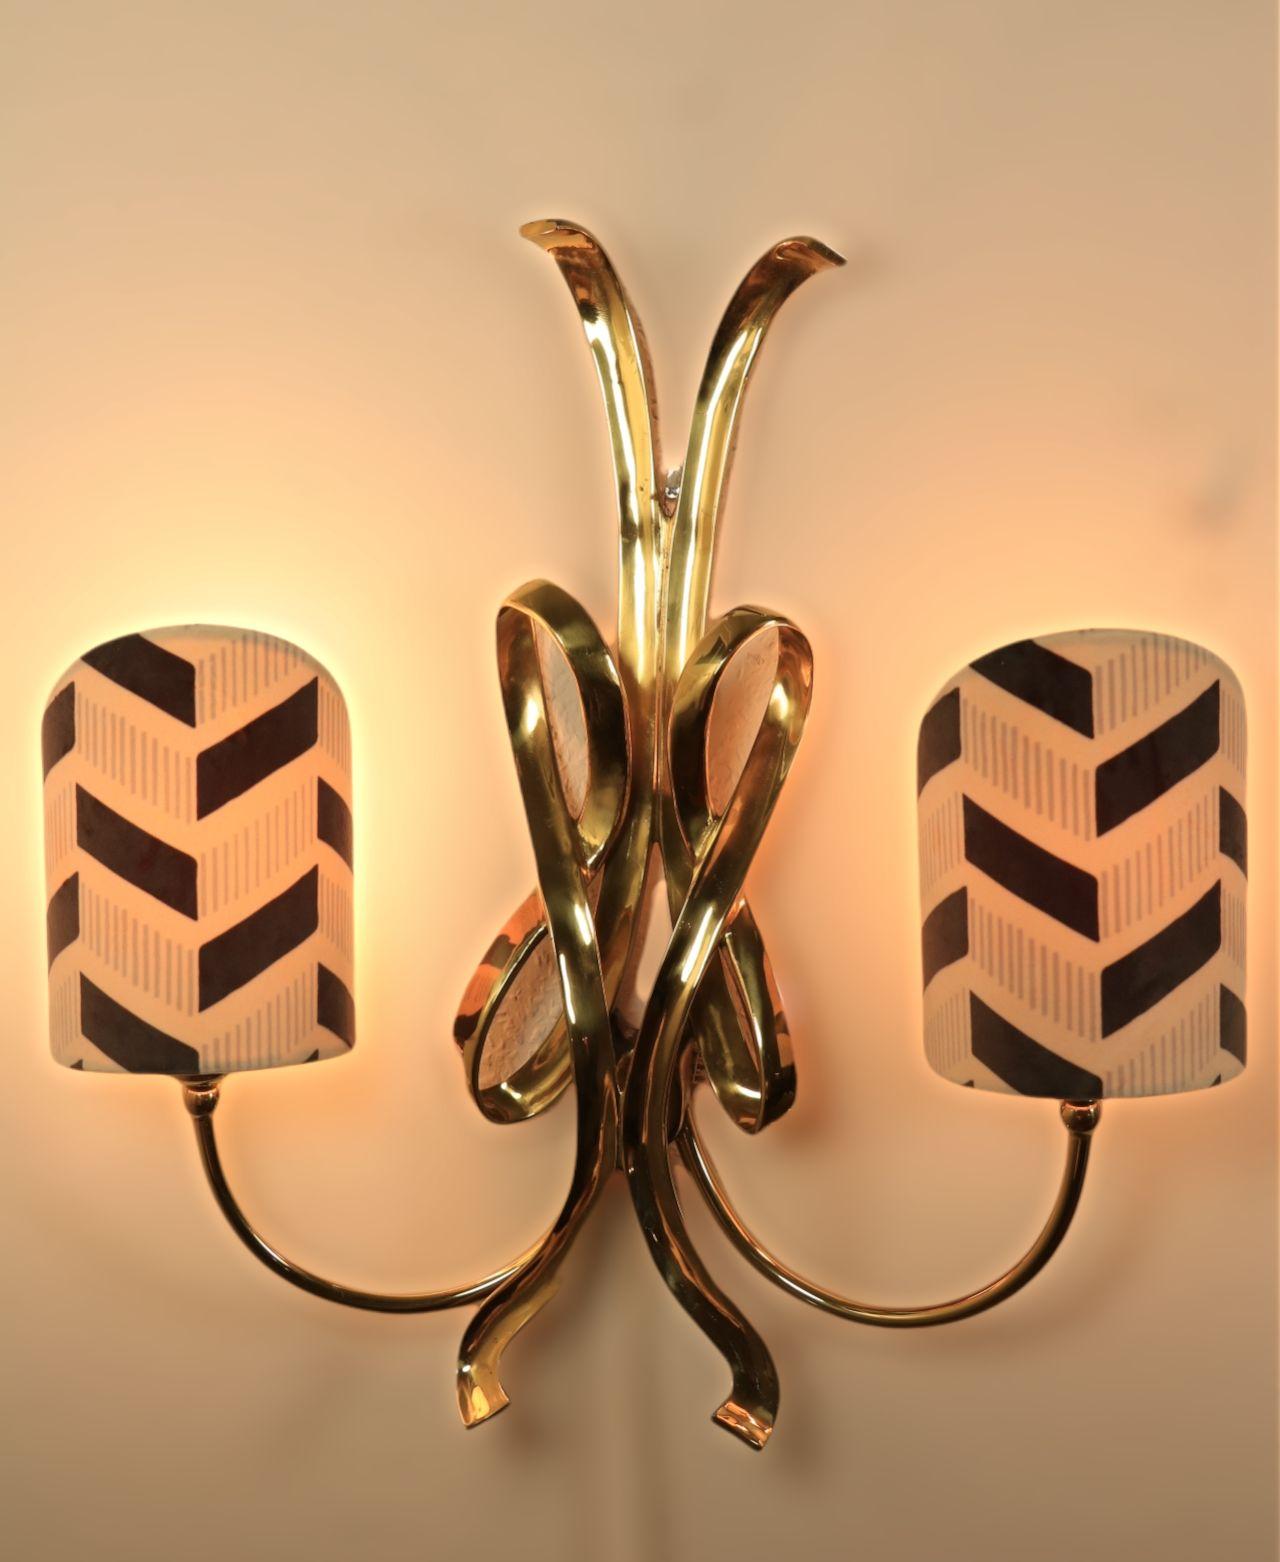 Very high quality golden wall lamp with newly made velvet lamp shades. 
Opulent style. Great for a mix with e.g. minimalist furniture.
Brass and velvet.
 
By Hans Möller (see label on the back), Germany.
Handcrafted and limited edition.
